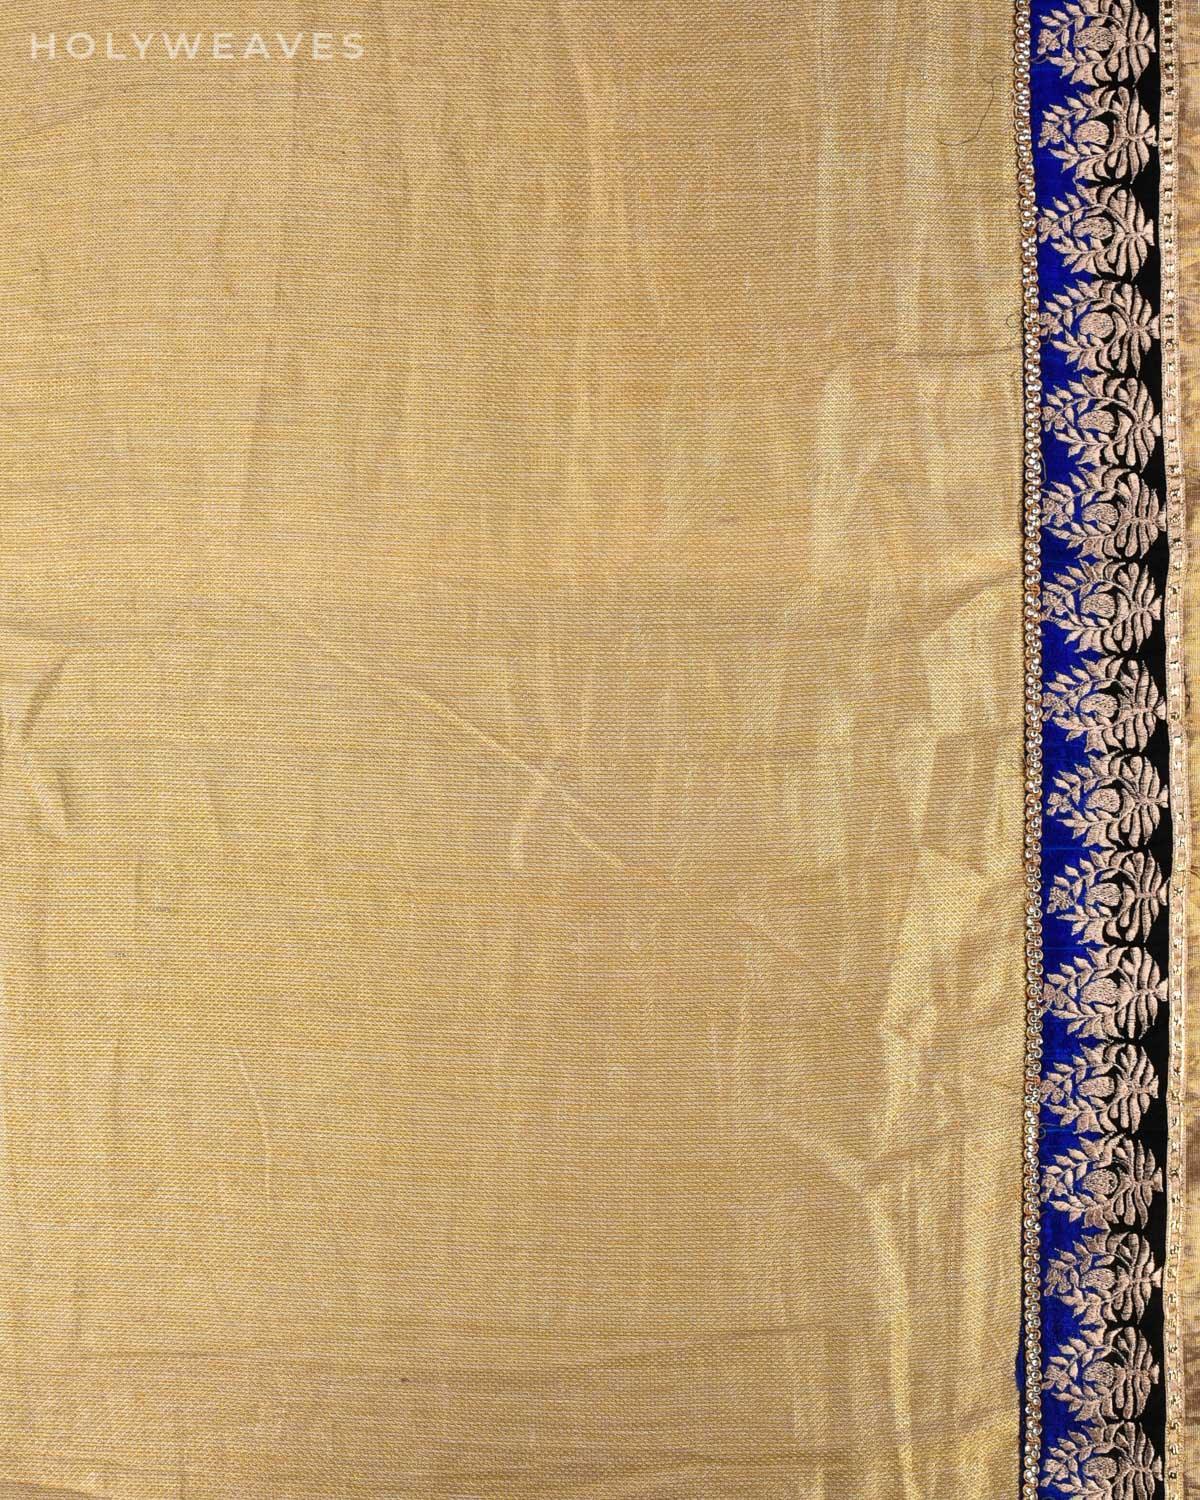 Beige Embroidered Georgette Saree - By HolyWeaves, Benares